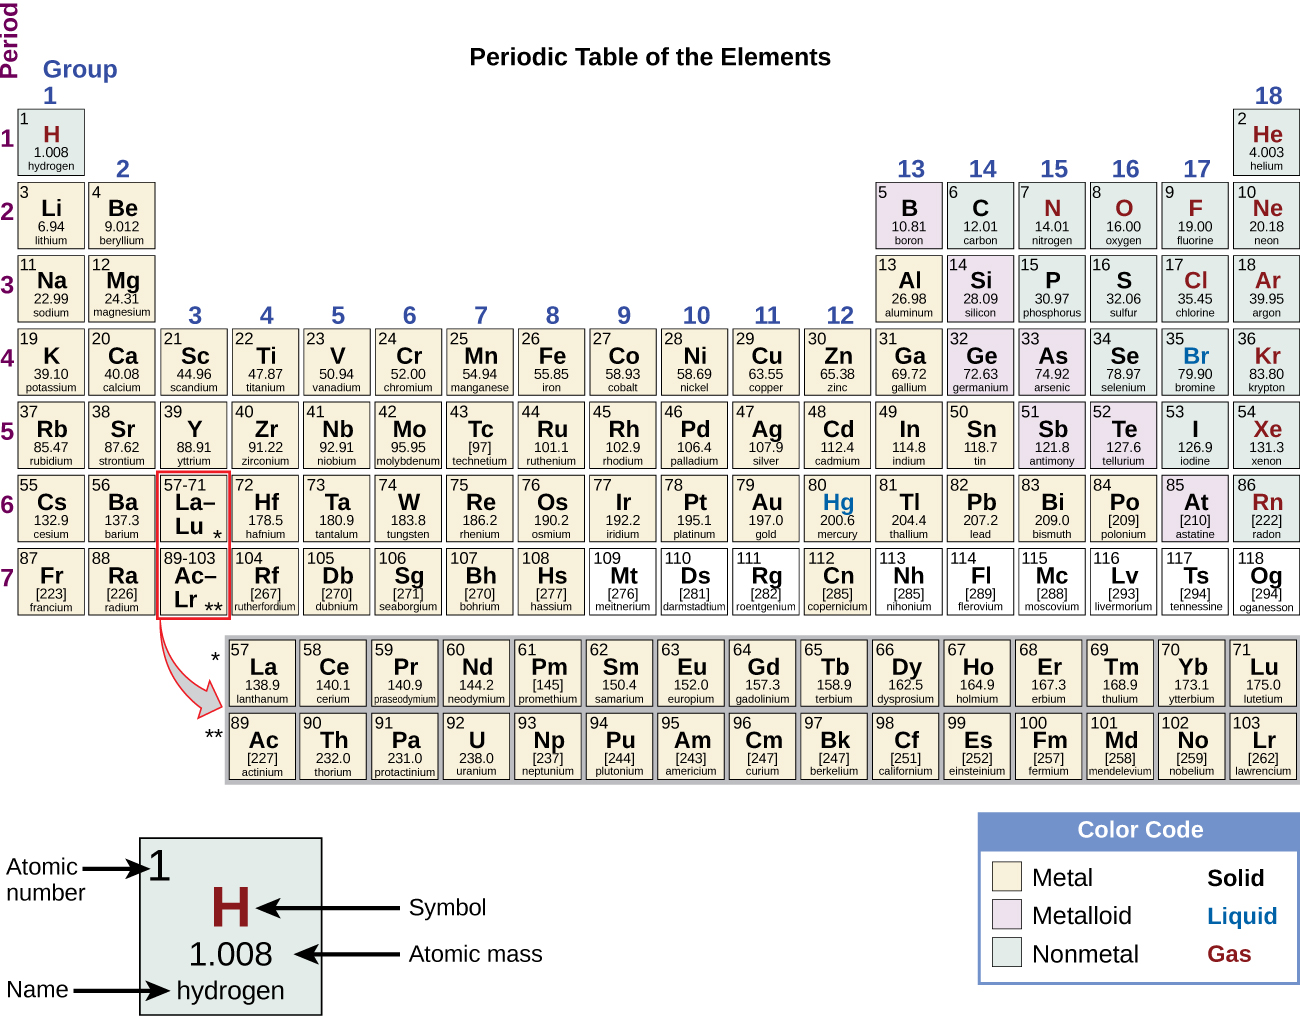 On this depiction of the periodic table, the metals are indicated with a yellow color and dominate the left two thirds of the periodic table. The nonmetals are colored peach and are largely confined to the upper right area of the table, with the exception of hydrogen, H, which is located in the extreme upper left of the table. The metalloids are colored purple and form a diagonal border between the metal and nonmetal areas of the table. Group 13 contains both metals and metalloids. Group 17 contains both nonmetals and metalloids. Groups 14 through 16 contain at least one representative of a metal, a metalloid, and a nonmetal. A key shows that, at room temperature, metals are solids, metalloids are liquids, and nonmetals are gases.